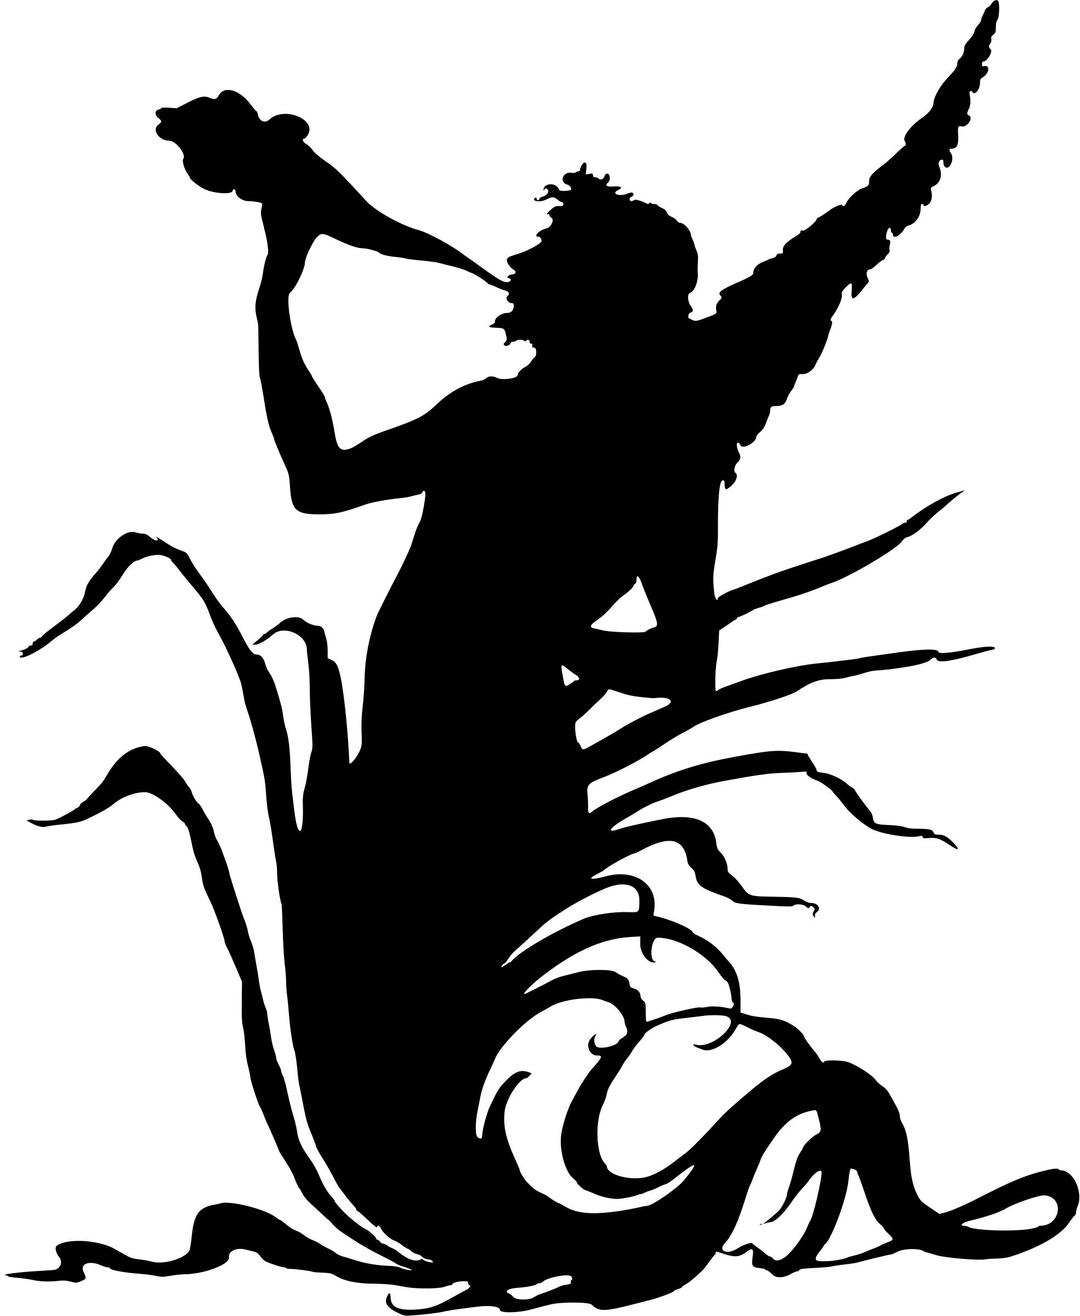 Flowery trumpeter silhouette png transparent